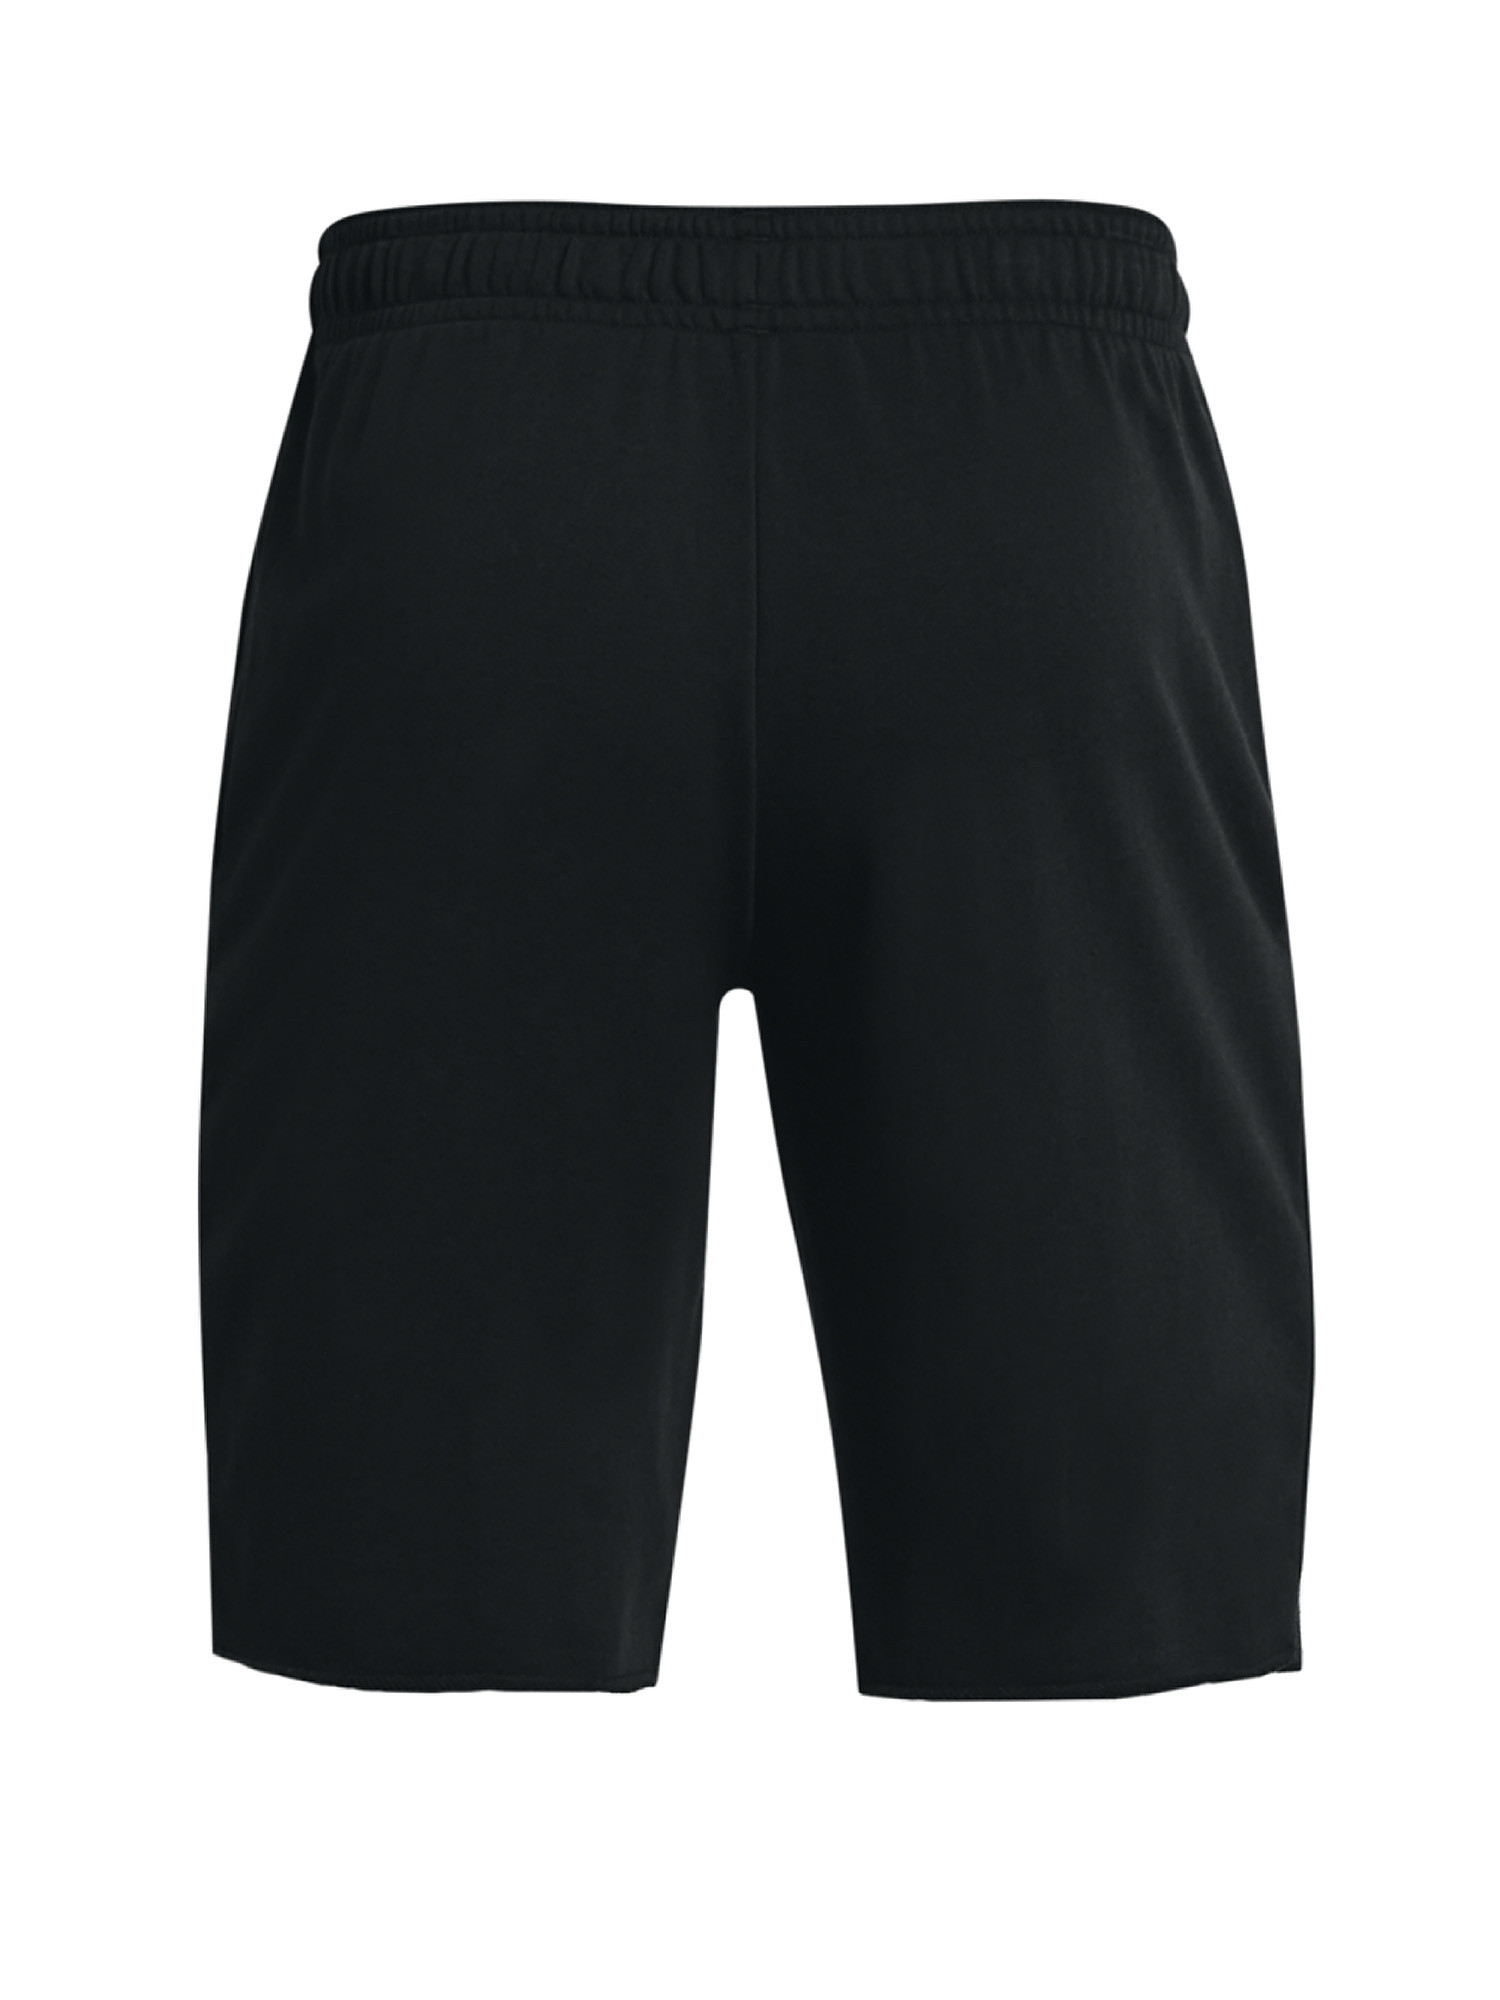 Under Armour - Shorts UA Rival Terry, Nero, large image number 1